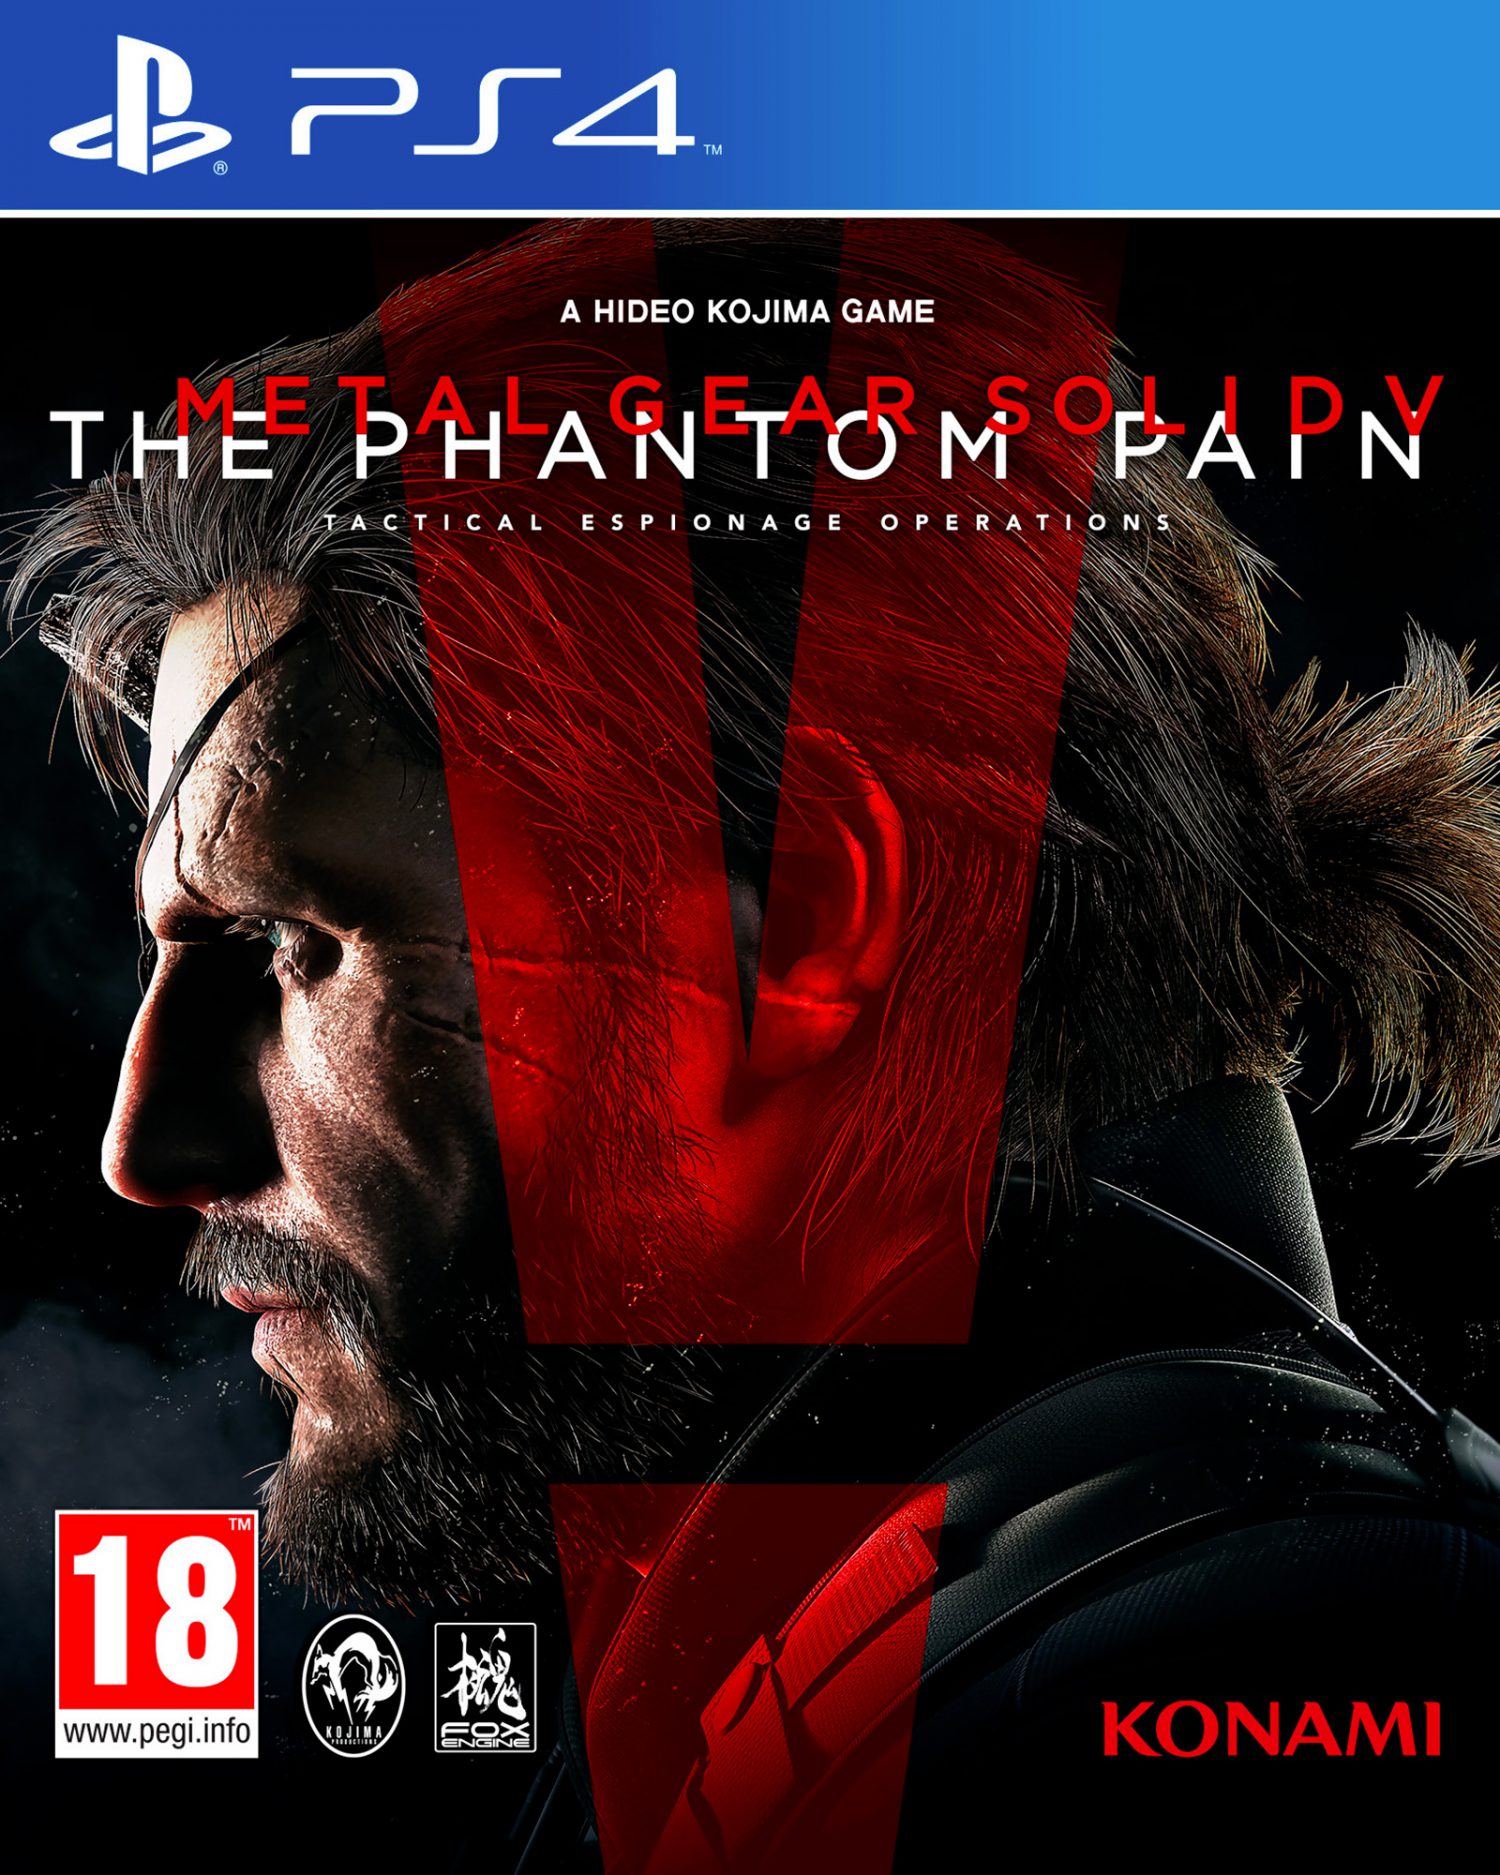 mgs5 the phantom pain steam collectors video